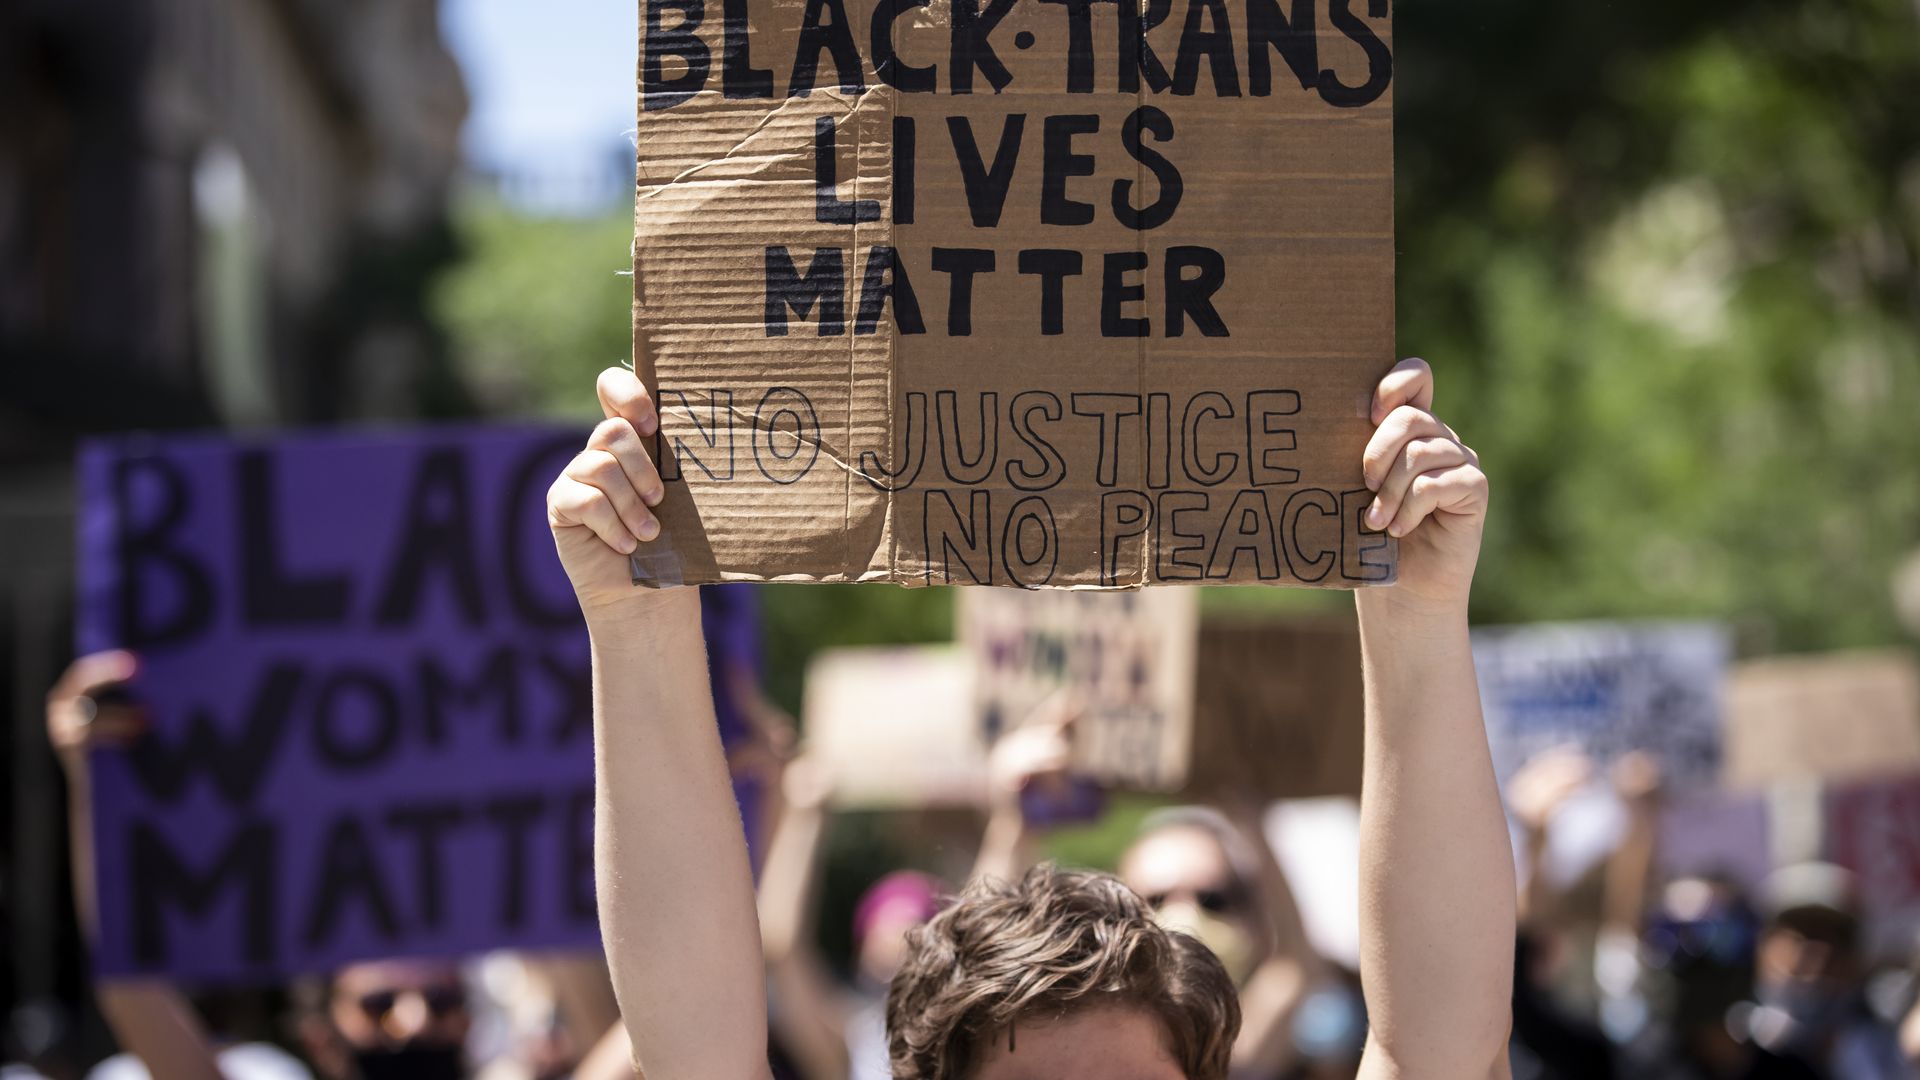  A Caucasian protester holds a homemade sign made from a box that says, "Black Trans Lives Matter No Justice No Peace" during a protest in  New York on June 12